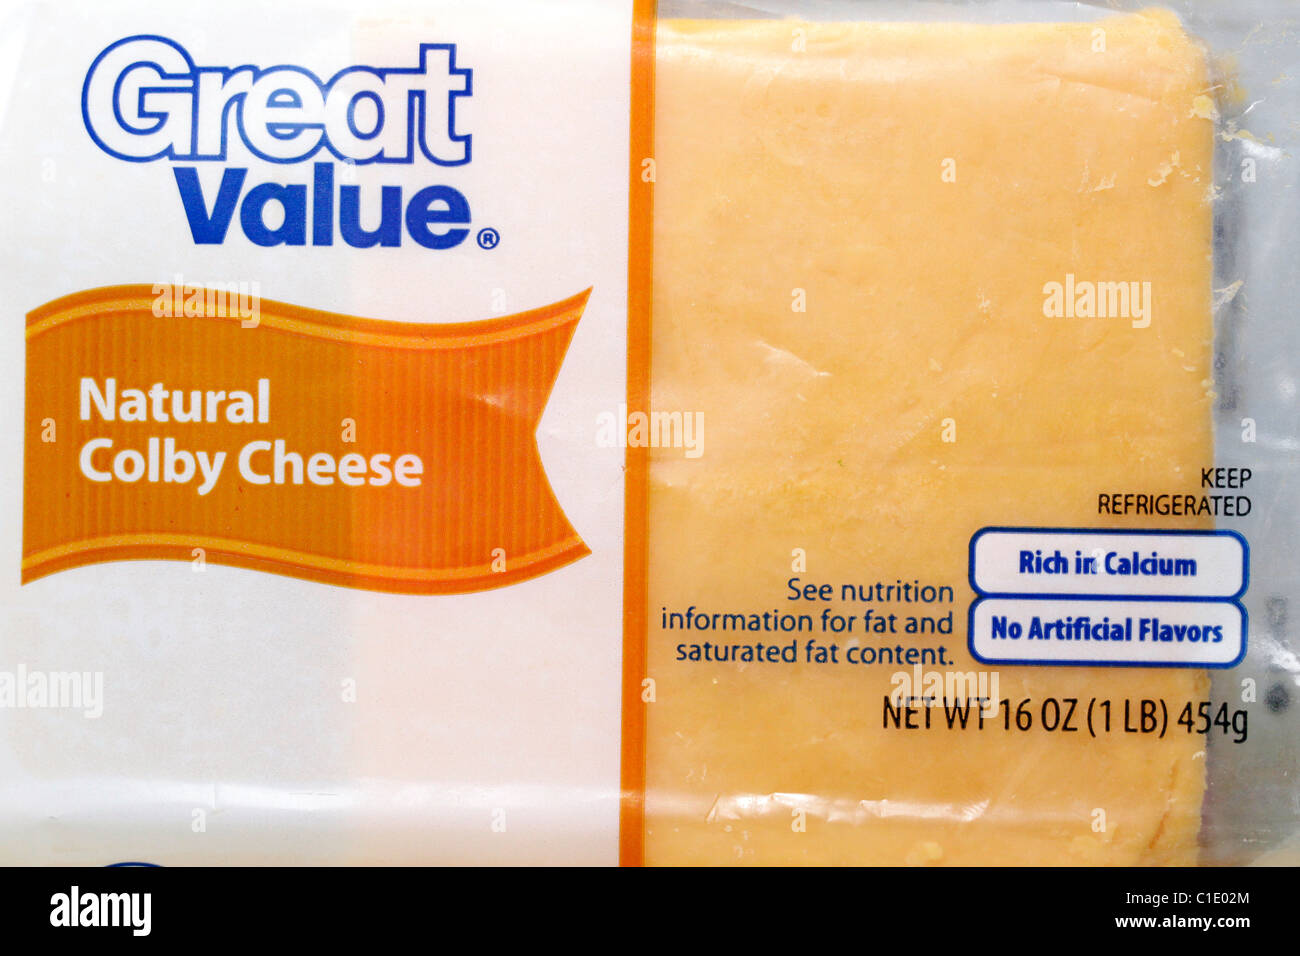 Wal-Mart brand of Colby Cheddar Cheese Stock Photo